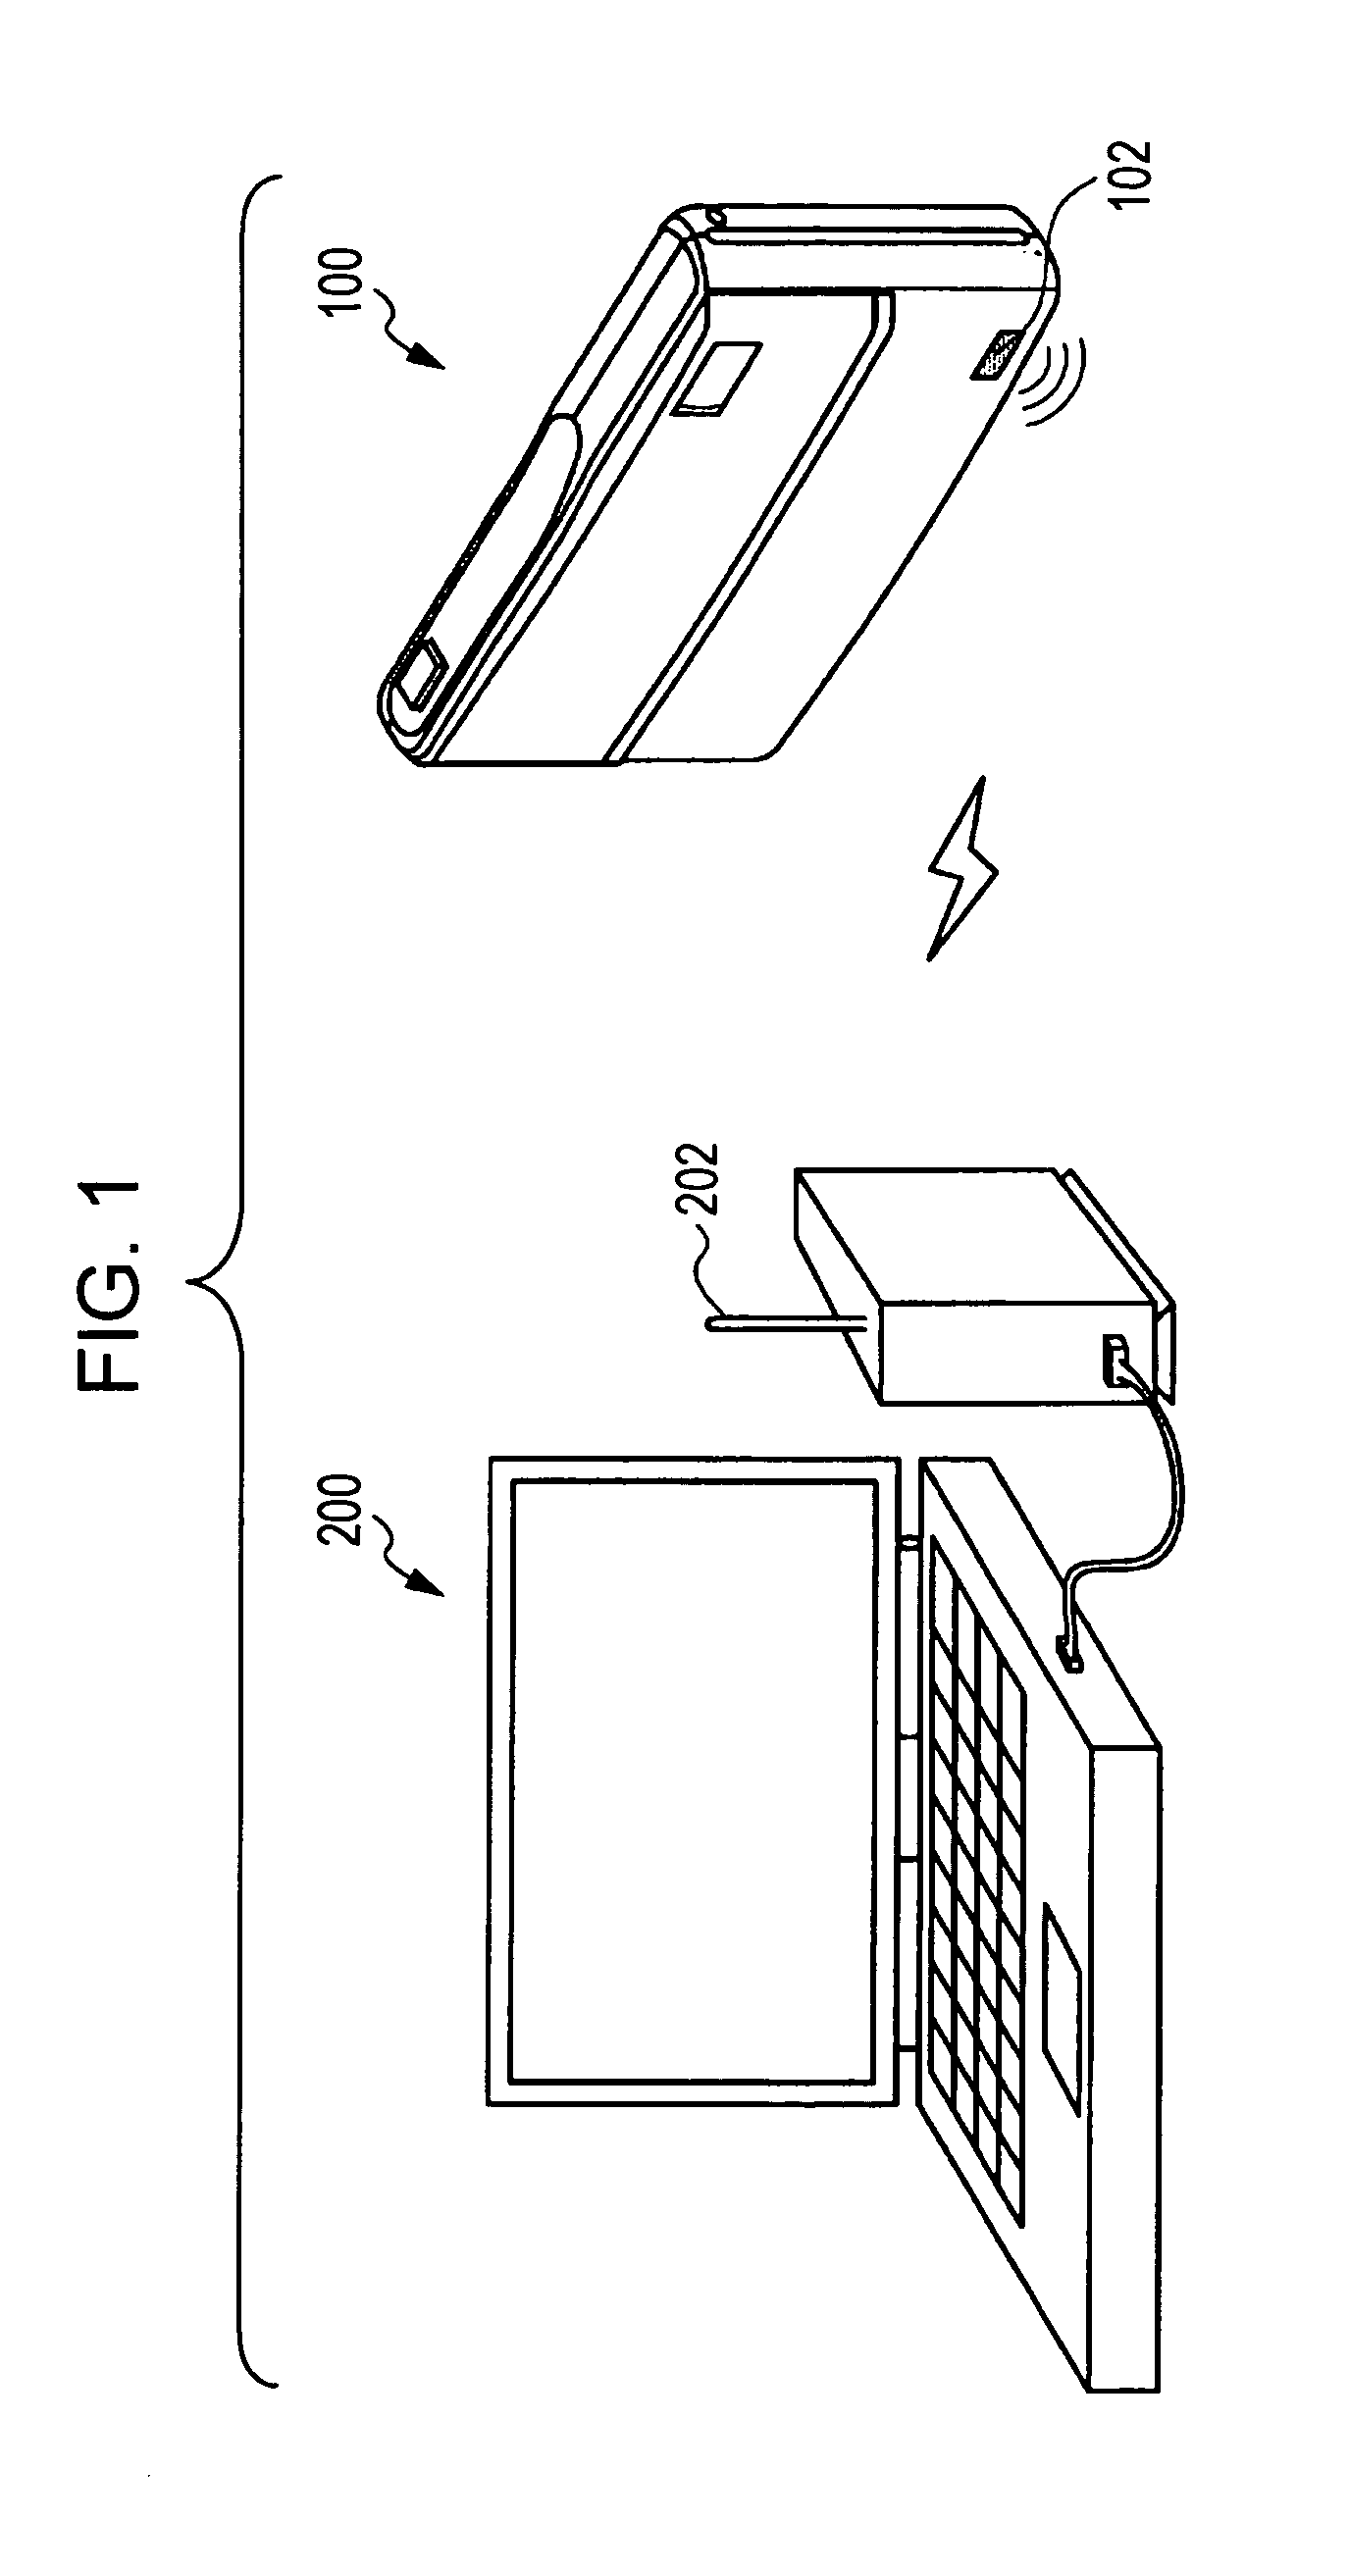 Receiving device, data file recording method, and program